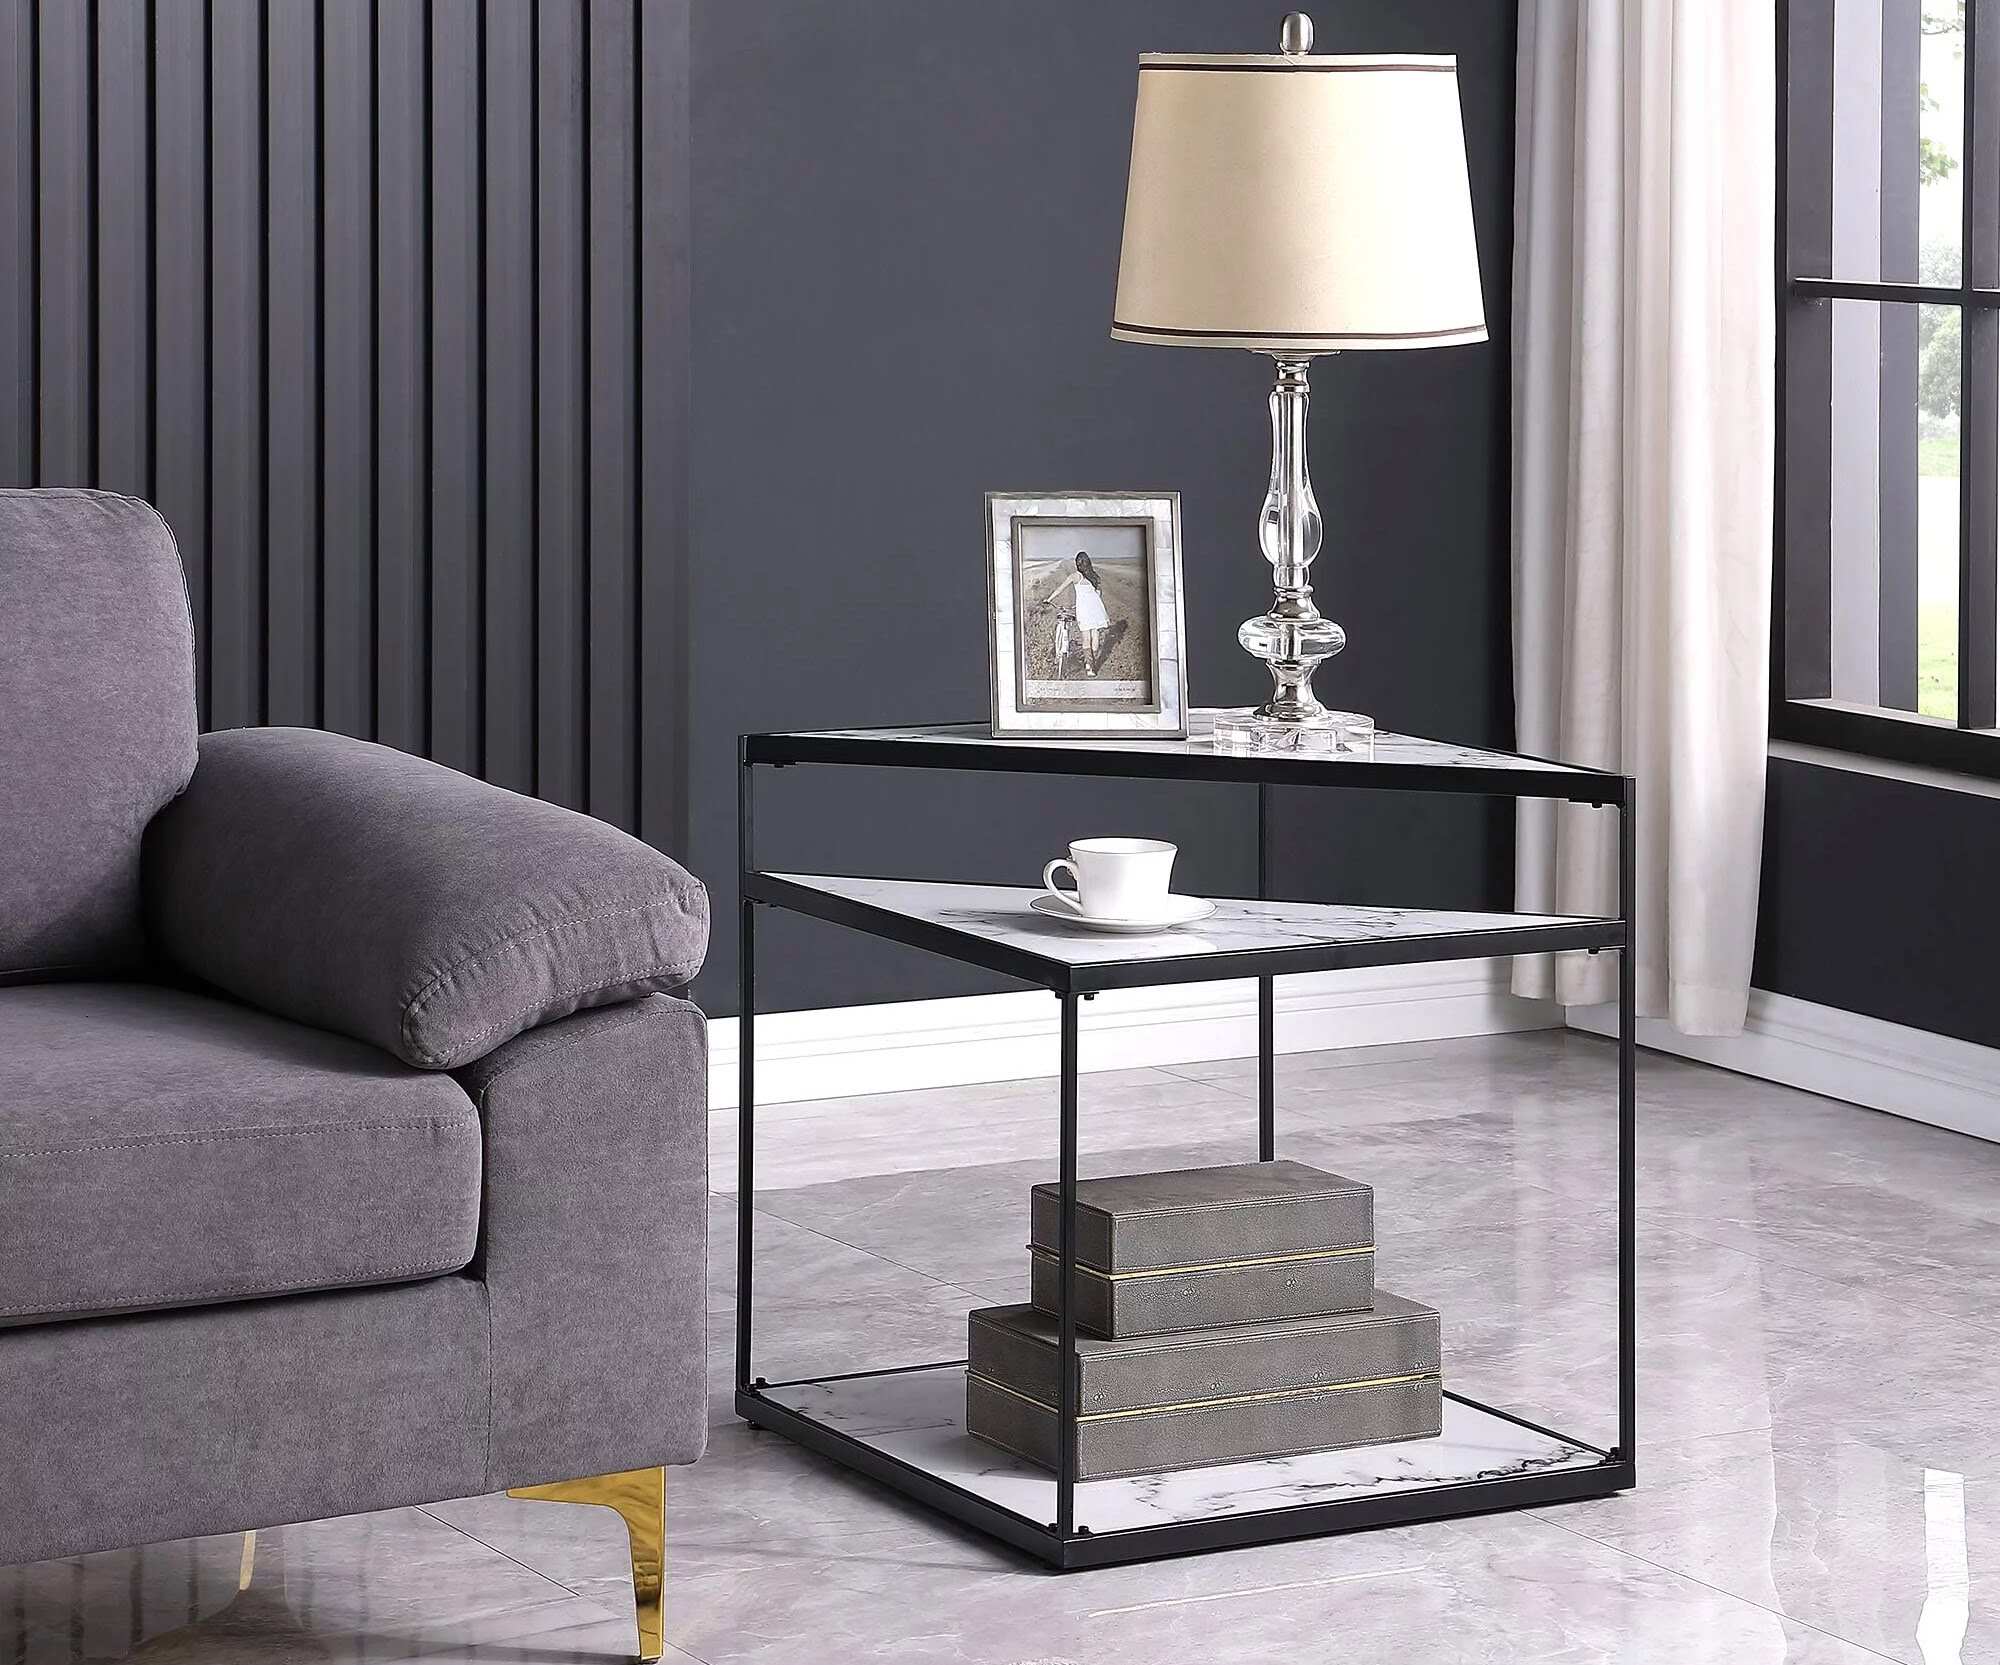 What Style Lamp Goes On A Rectangular End Table?